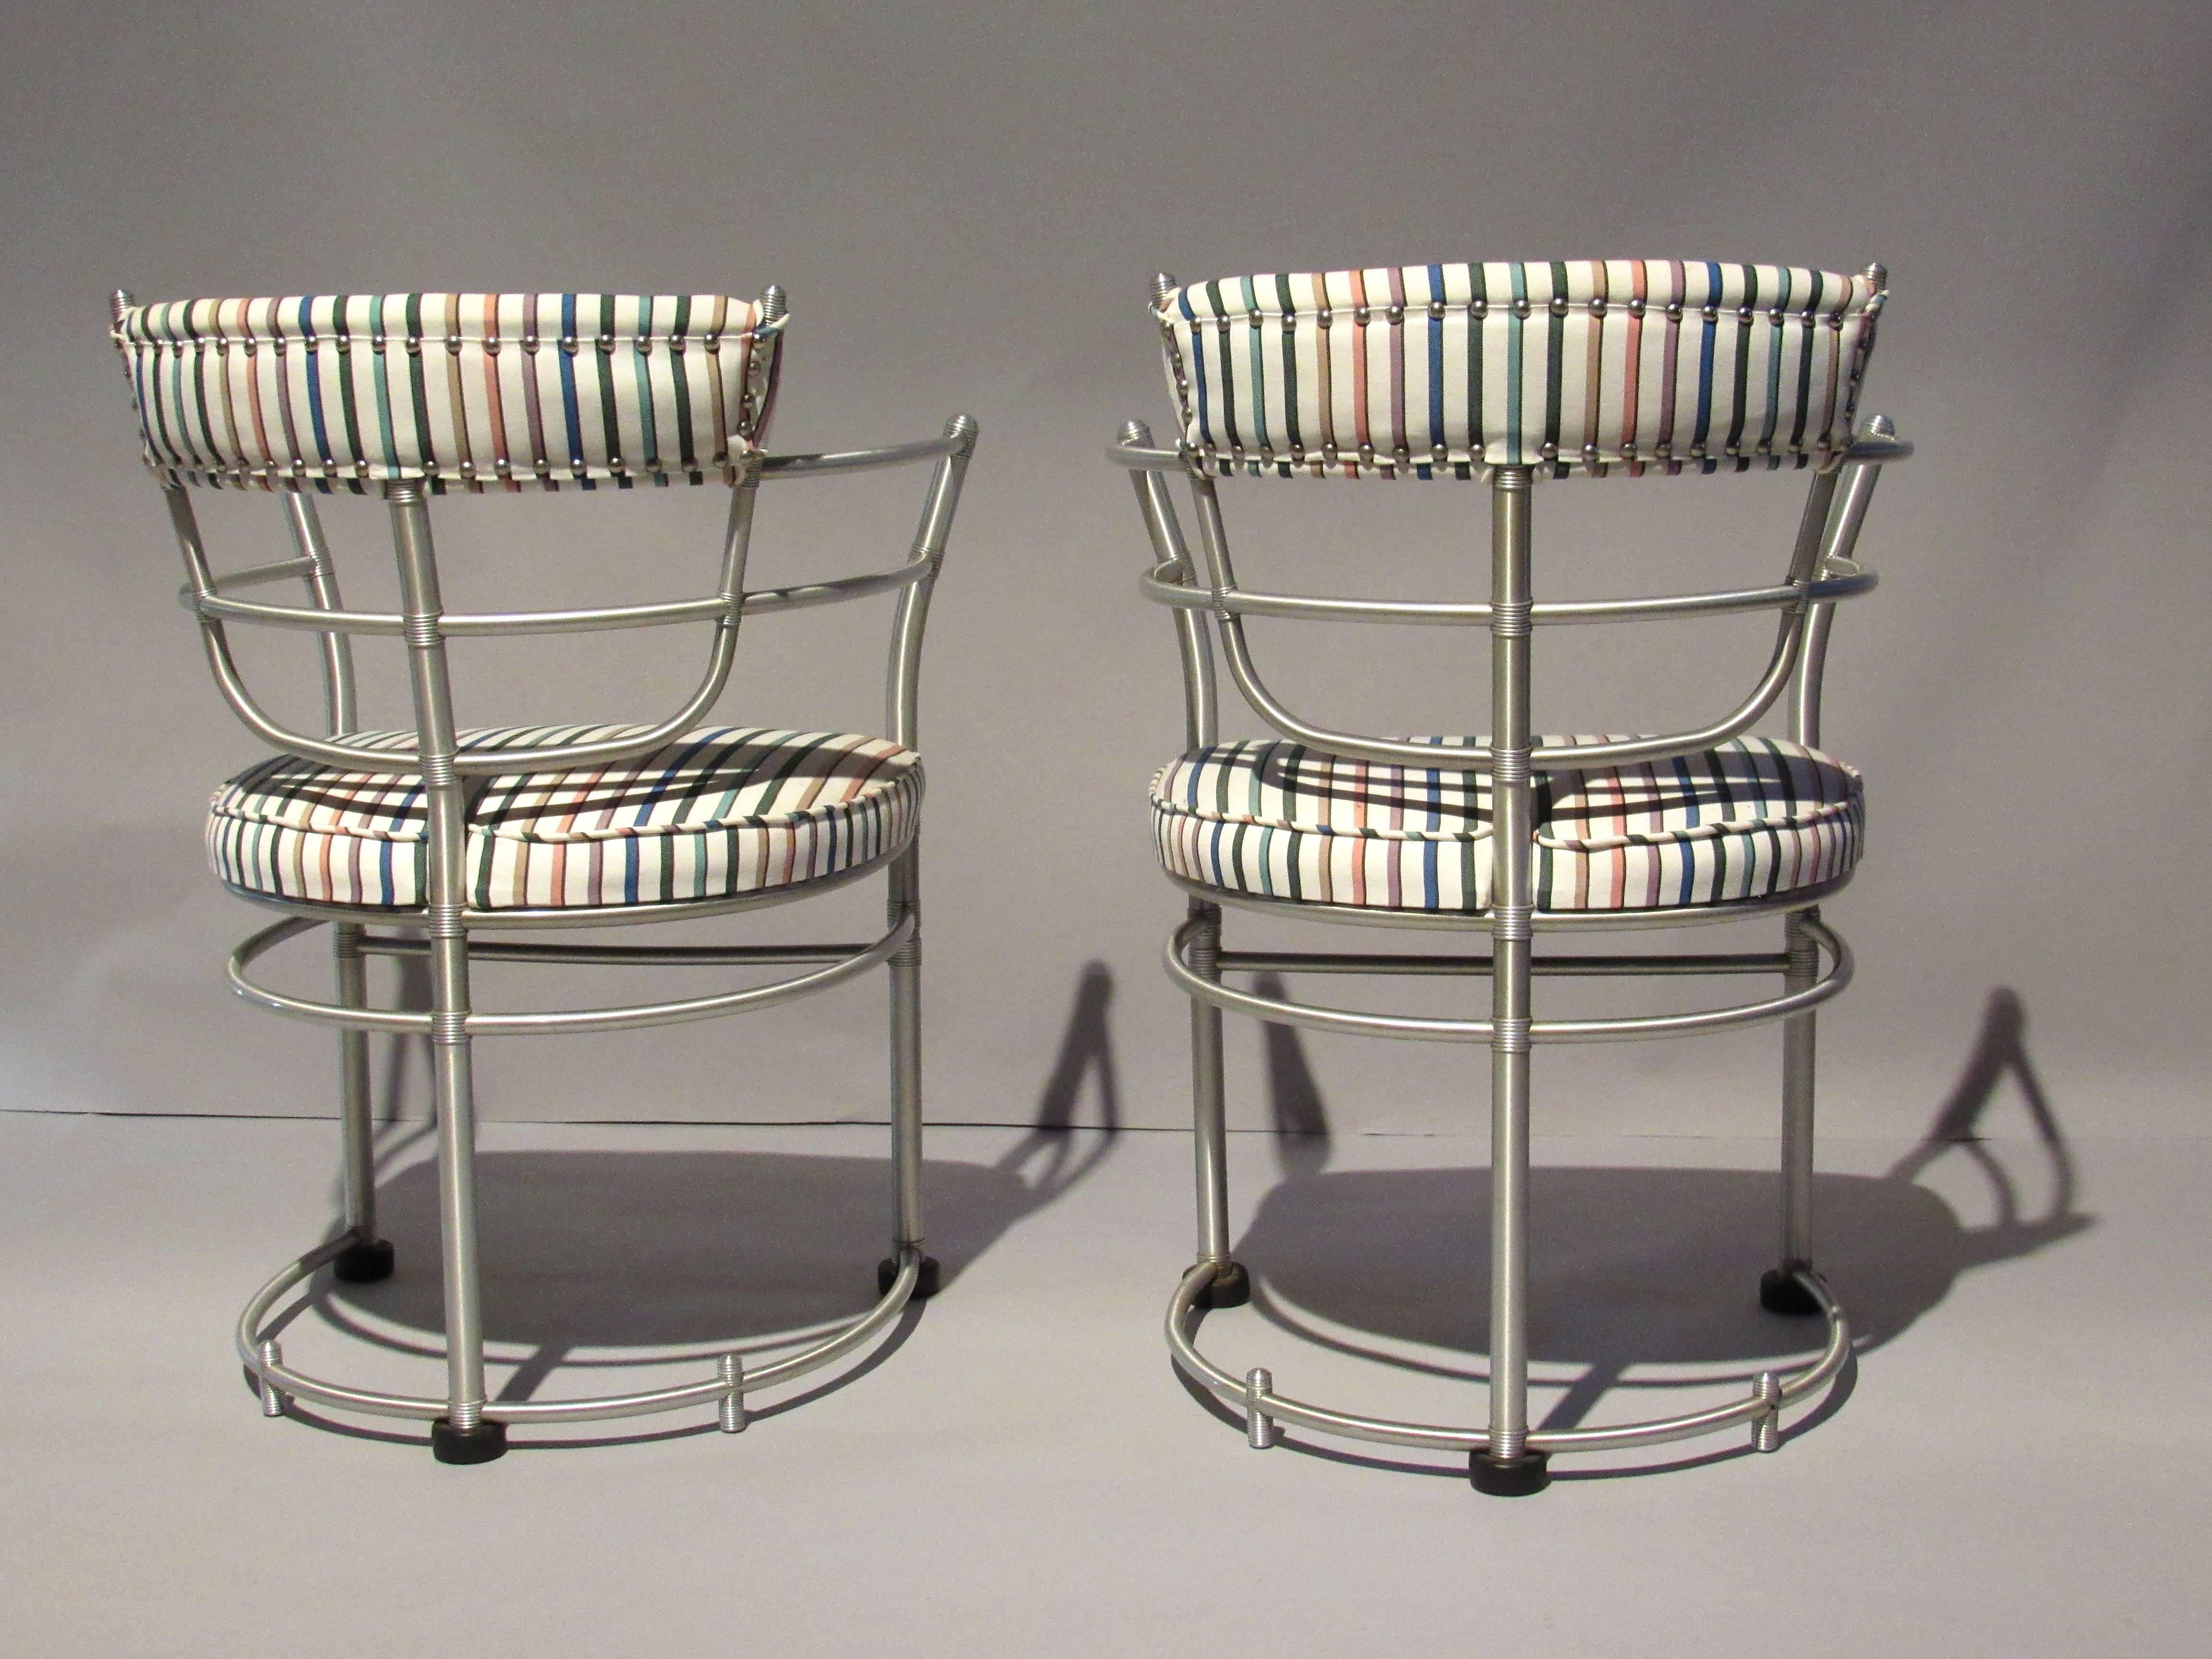 Anodized Pair of Warren McArthur Armchairs, Model 1044, 1933 to 1935